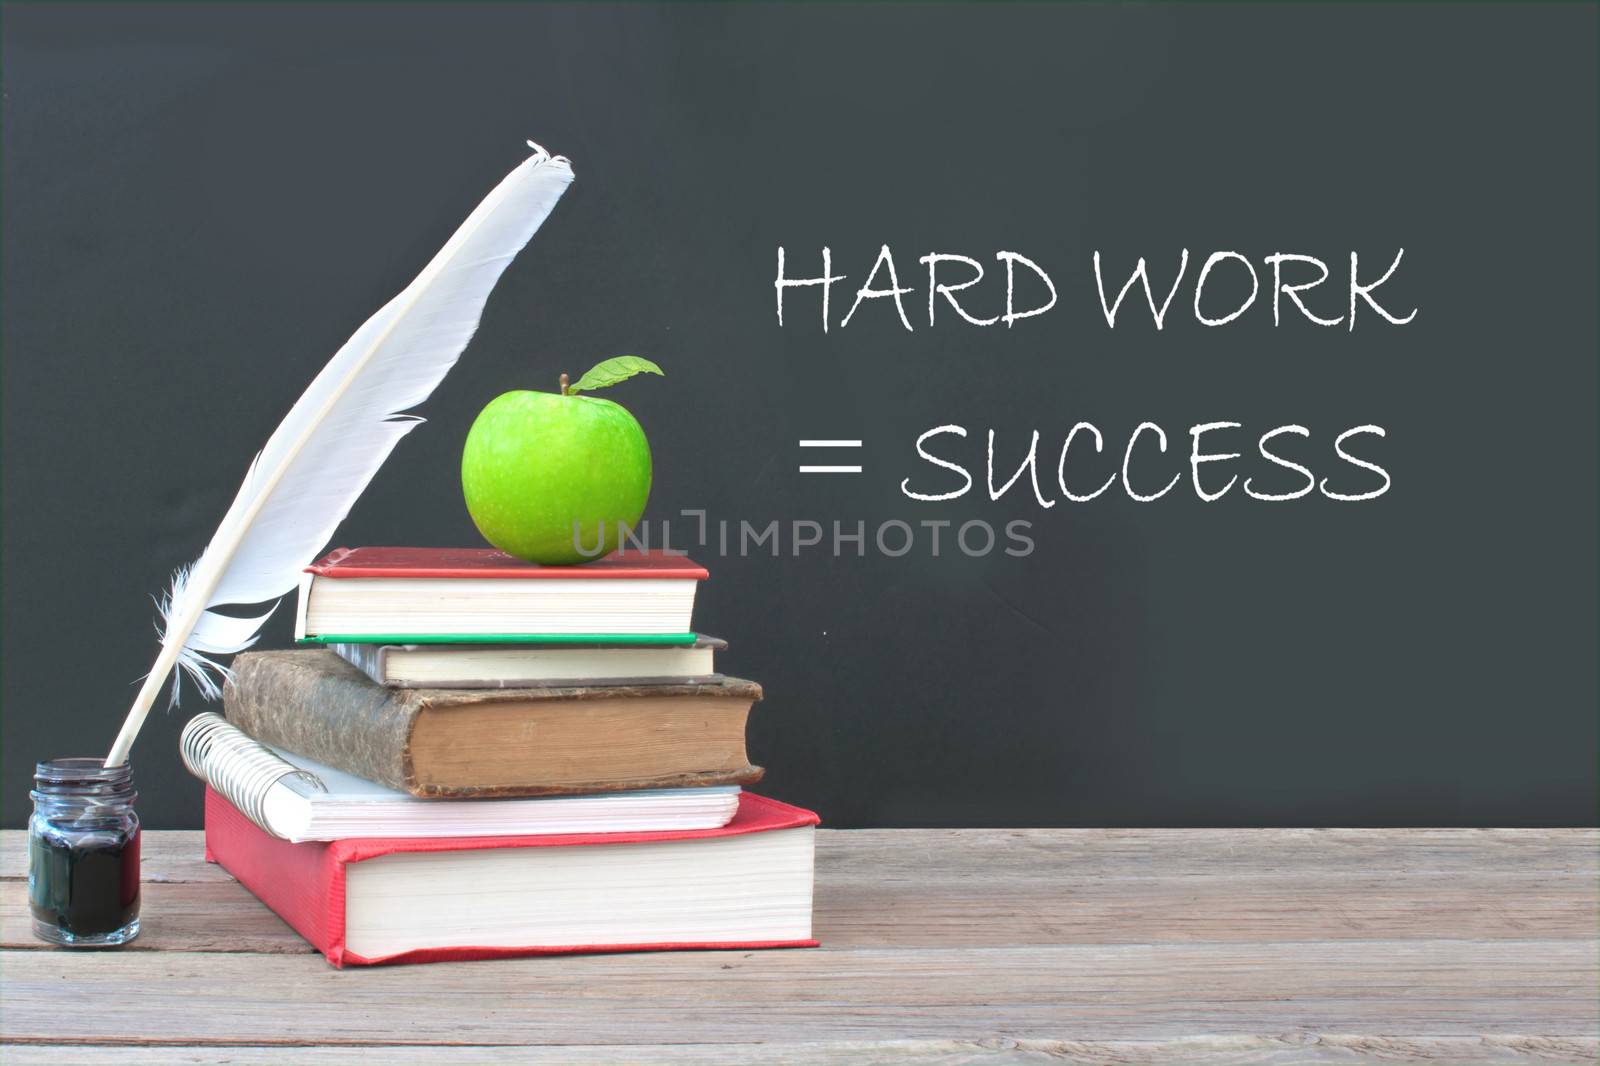 Hard work is success written on a blackboard with a pile of books, quill and ink